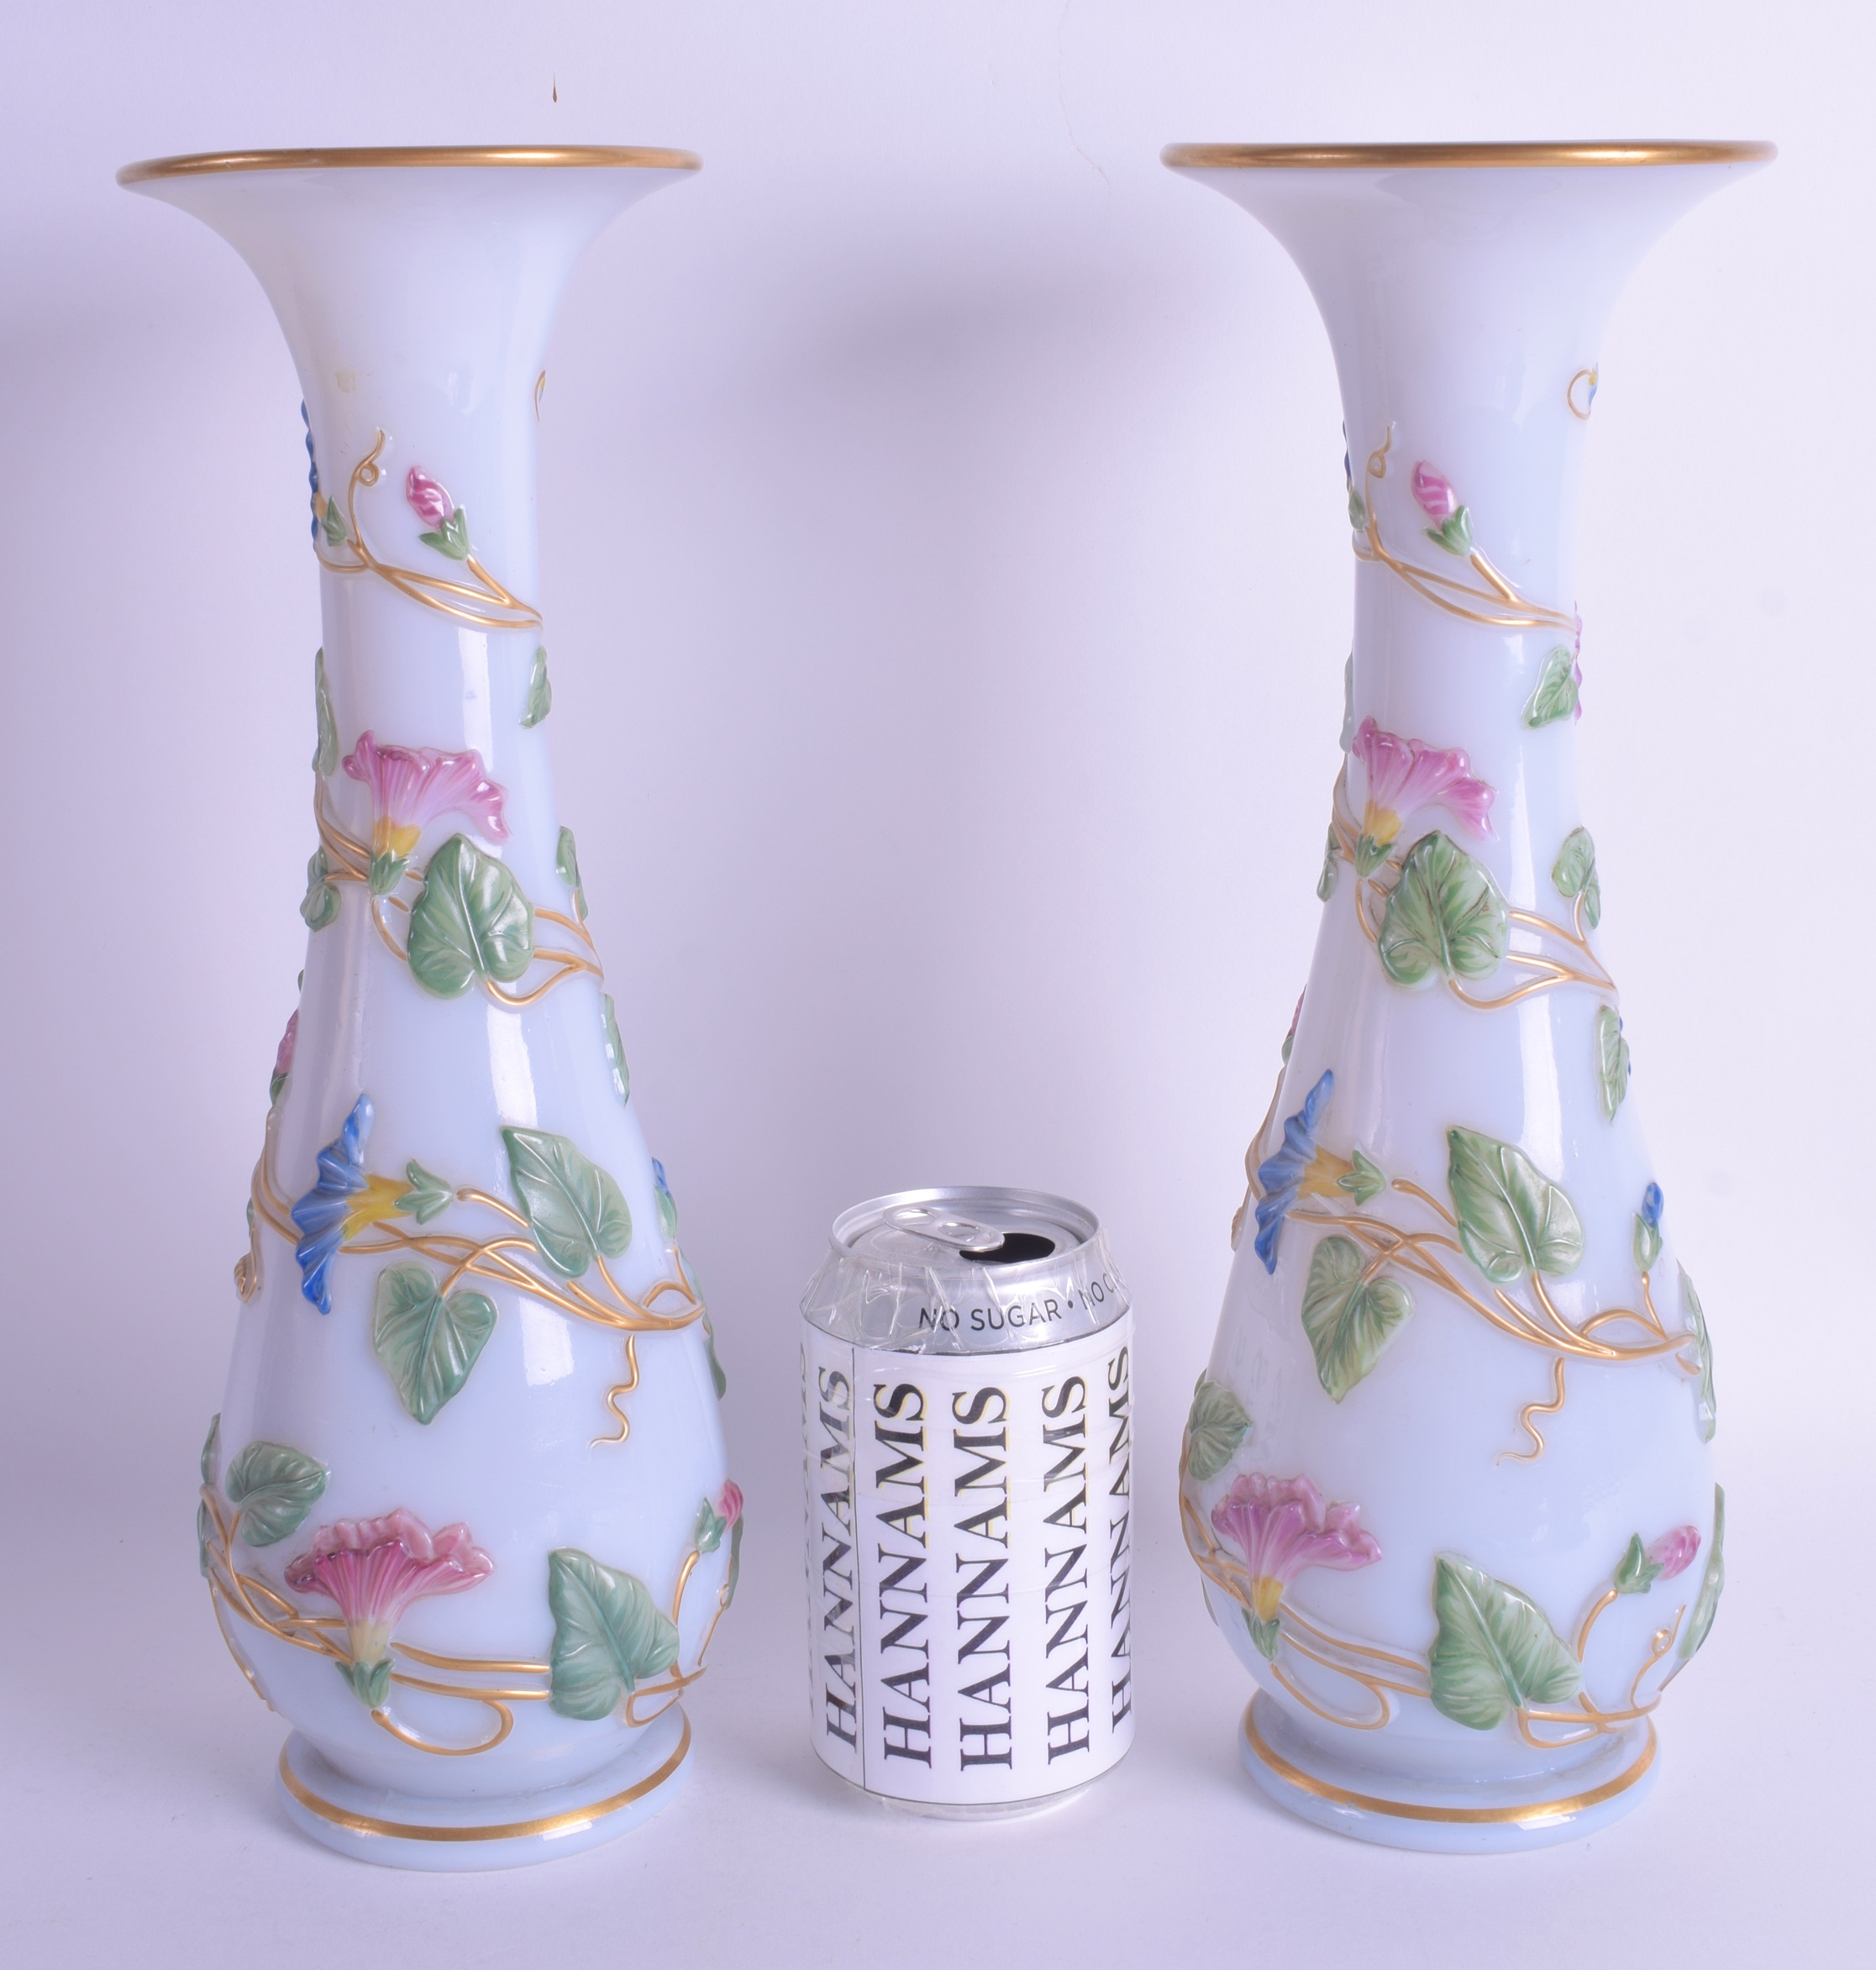 A FINE PAIR OF 19TH CENTURY BACCARAT OPALINE GLASS VASES overlaid with trailing vines and foliage. 3